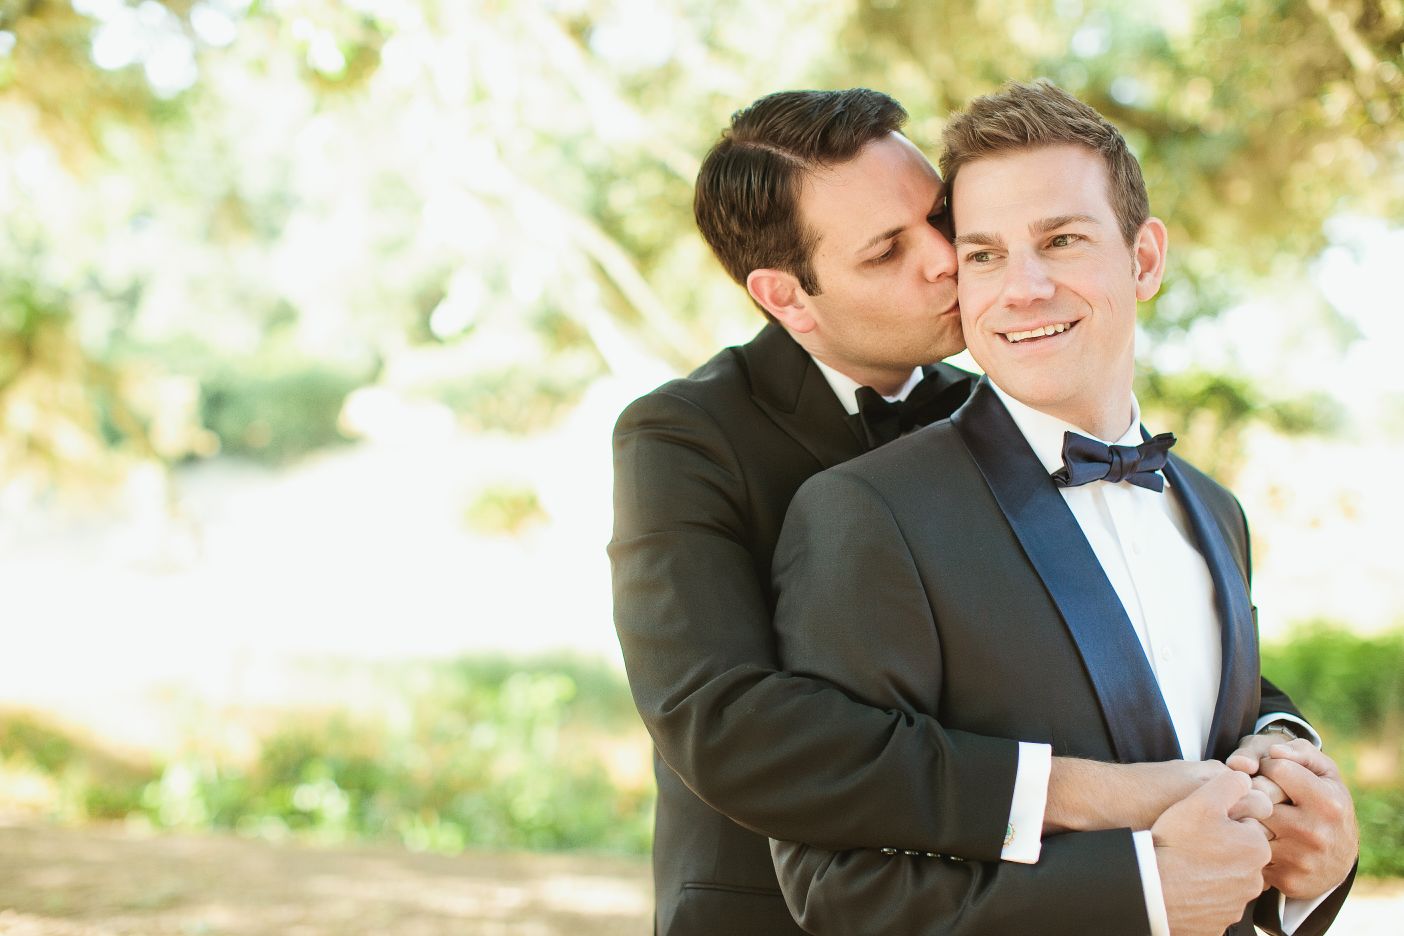 Coming gay man married